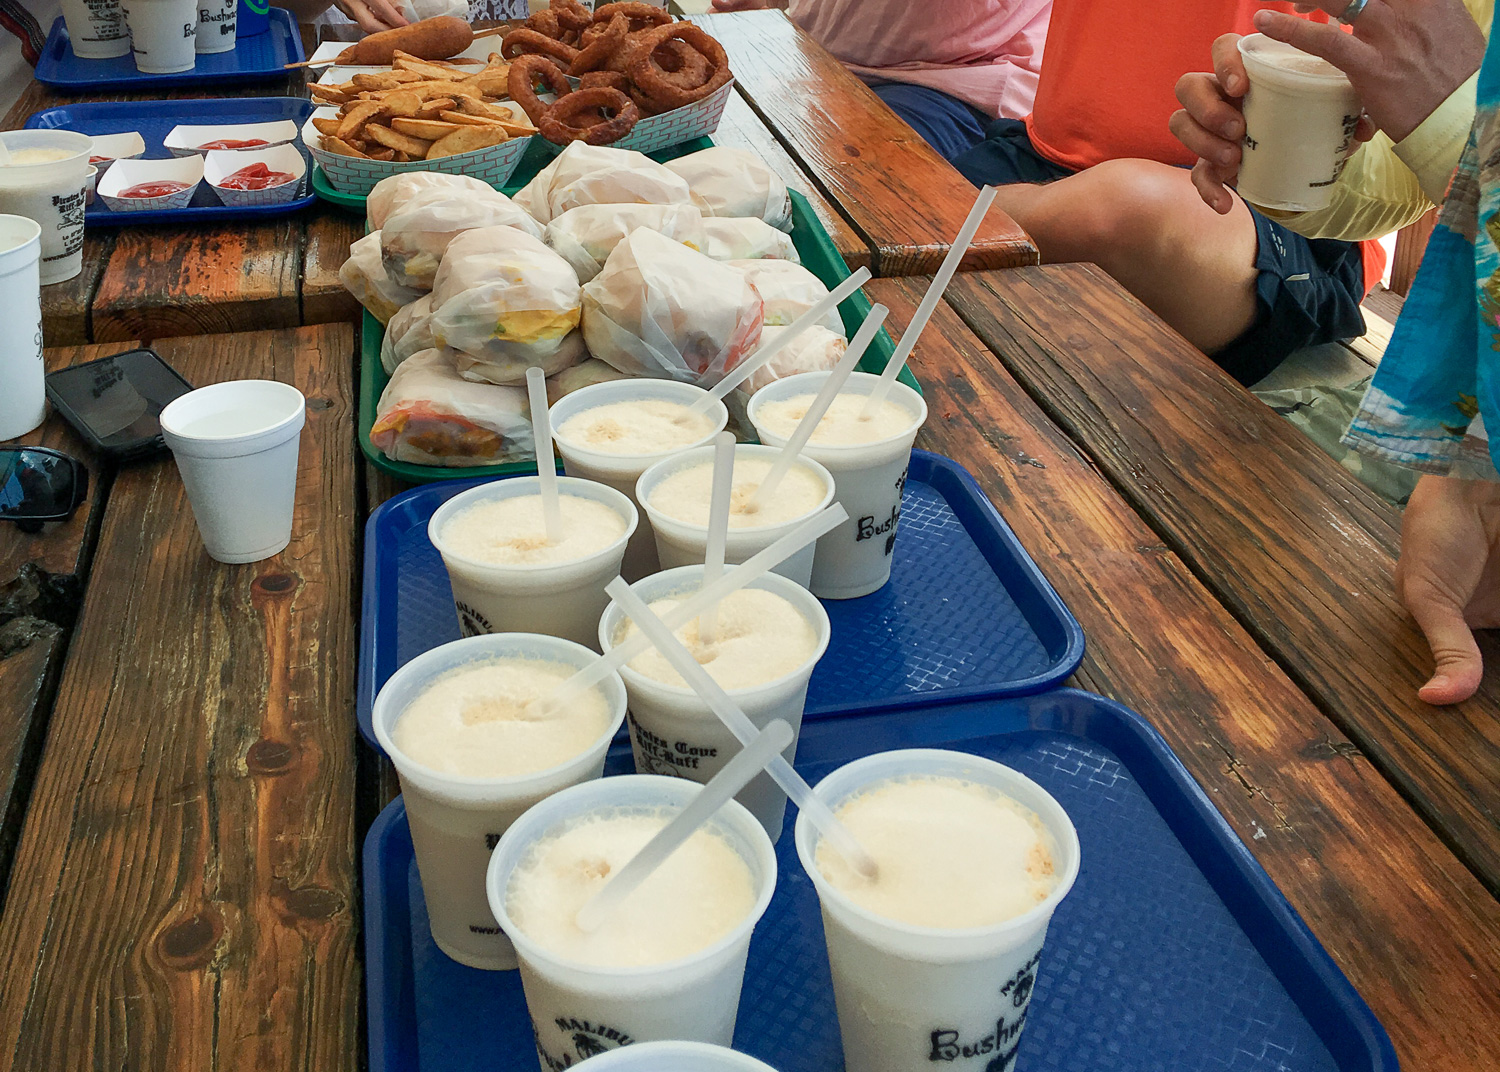 Fries, onion rings, cheeseburgers and Bushwackers at Pirate's Cove